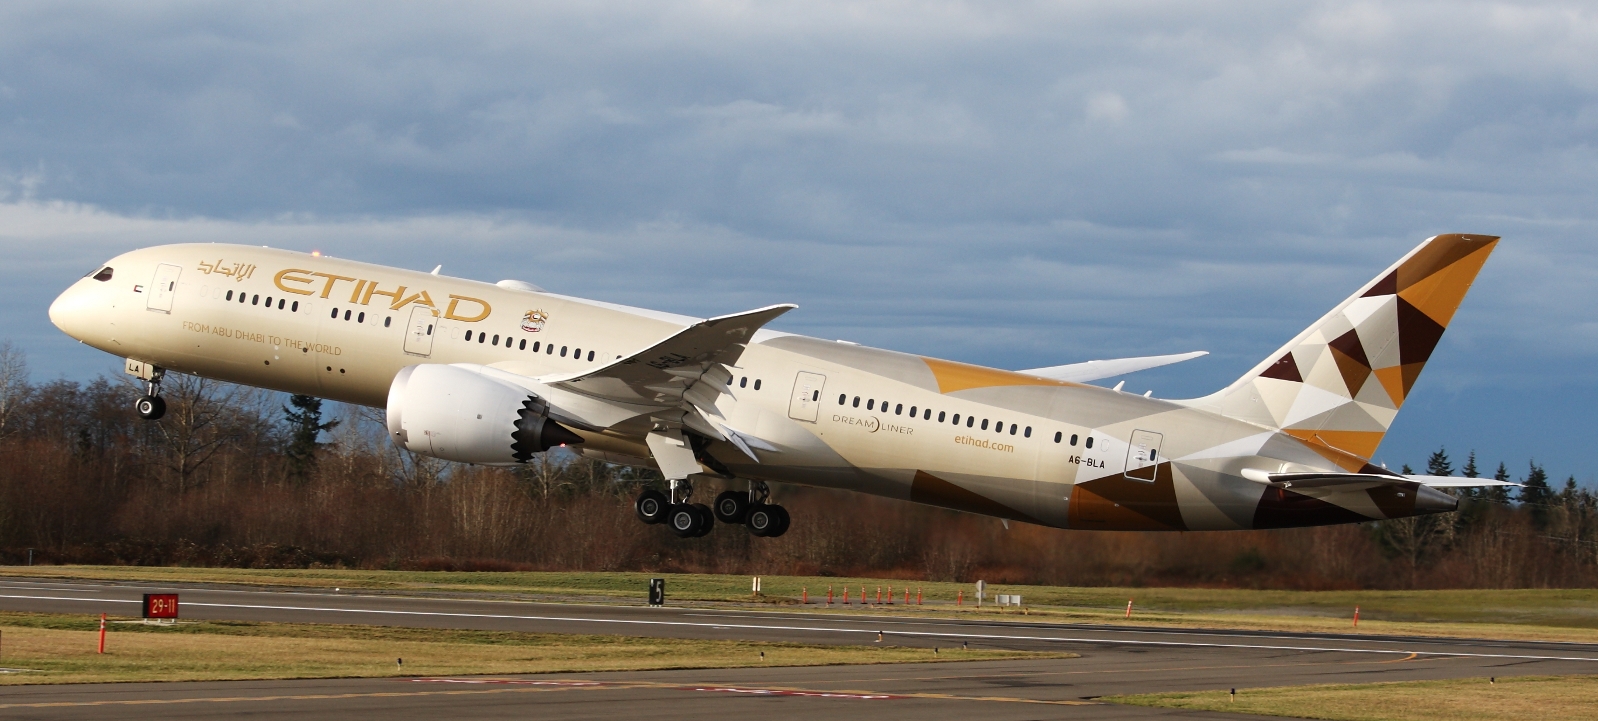 ETIHAD AIRWAYS LAUNCHES NEW ANDROID APP FOR SMARTPHONES